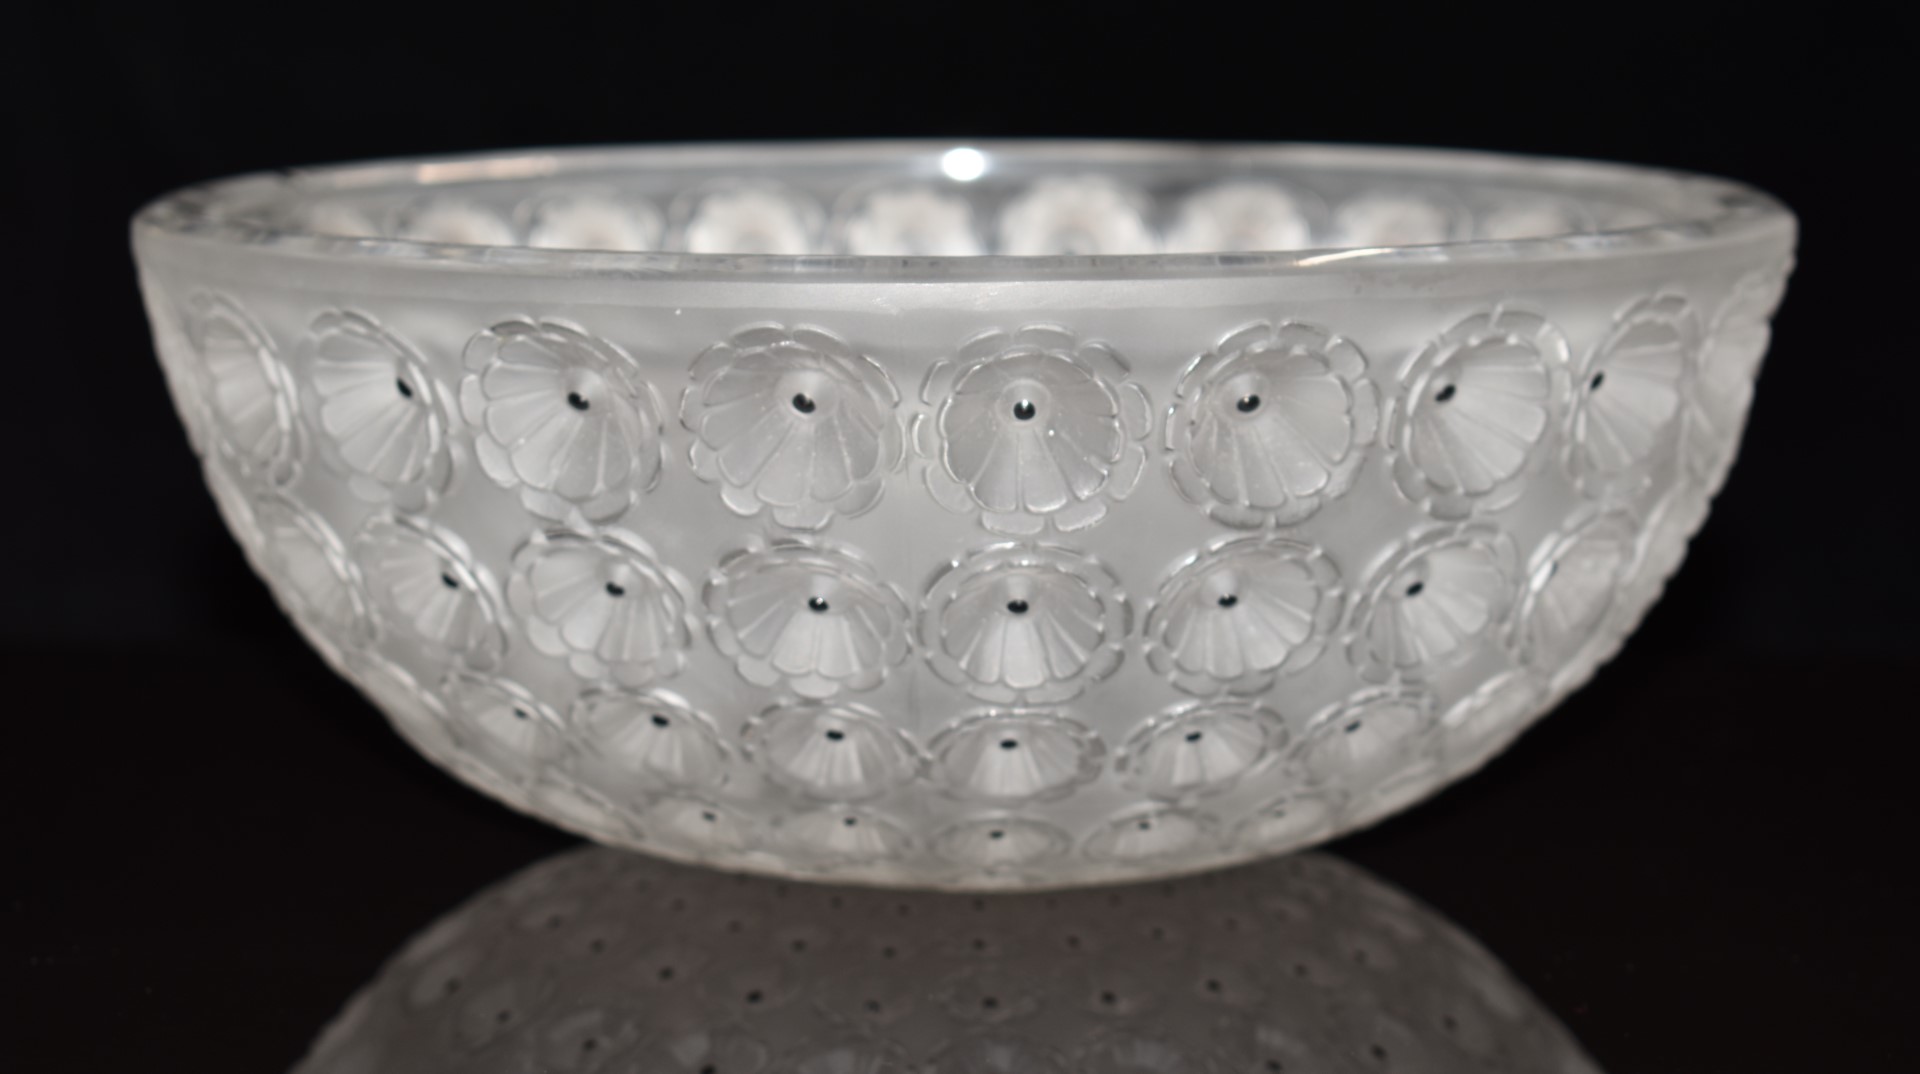 Lalique Nemours glass bowl, signed 'Lalique France' to base, 25cm in diameter - Image 2 of 4